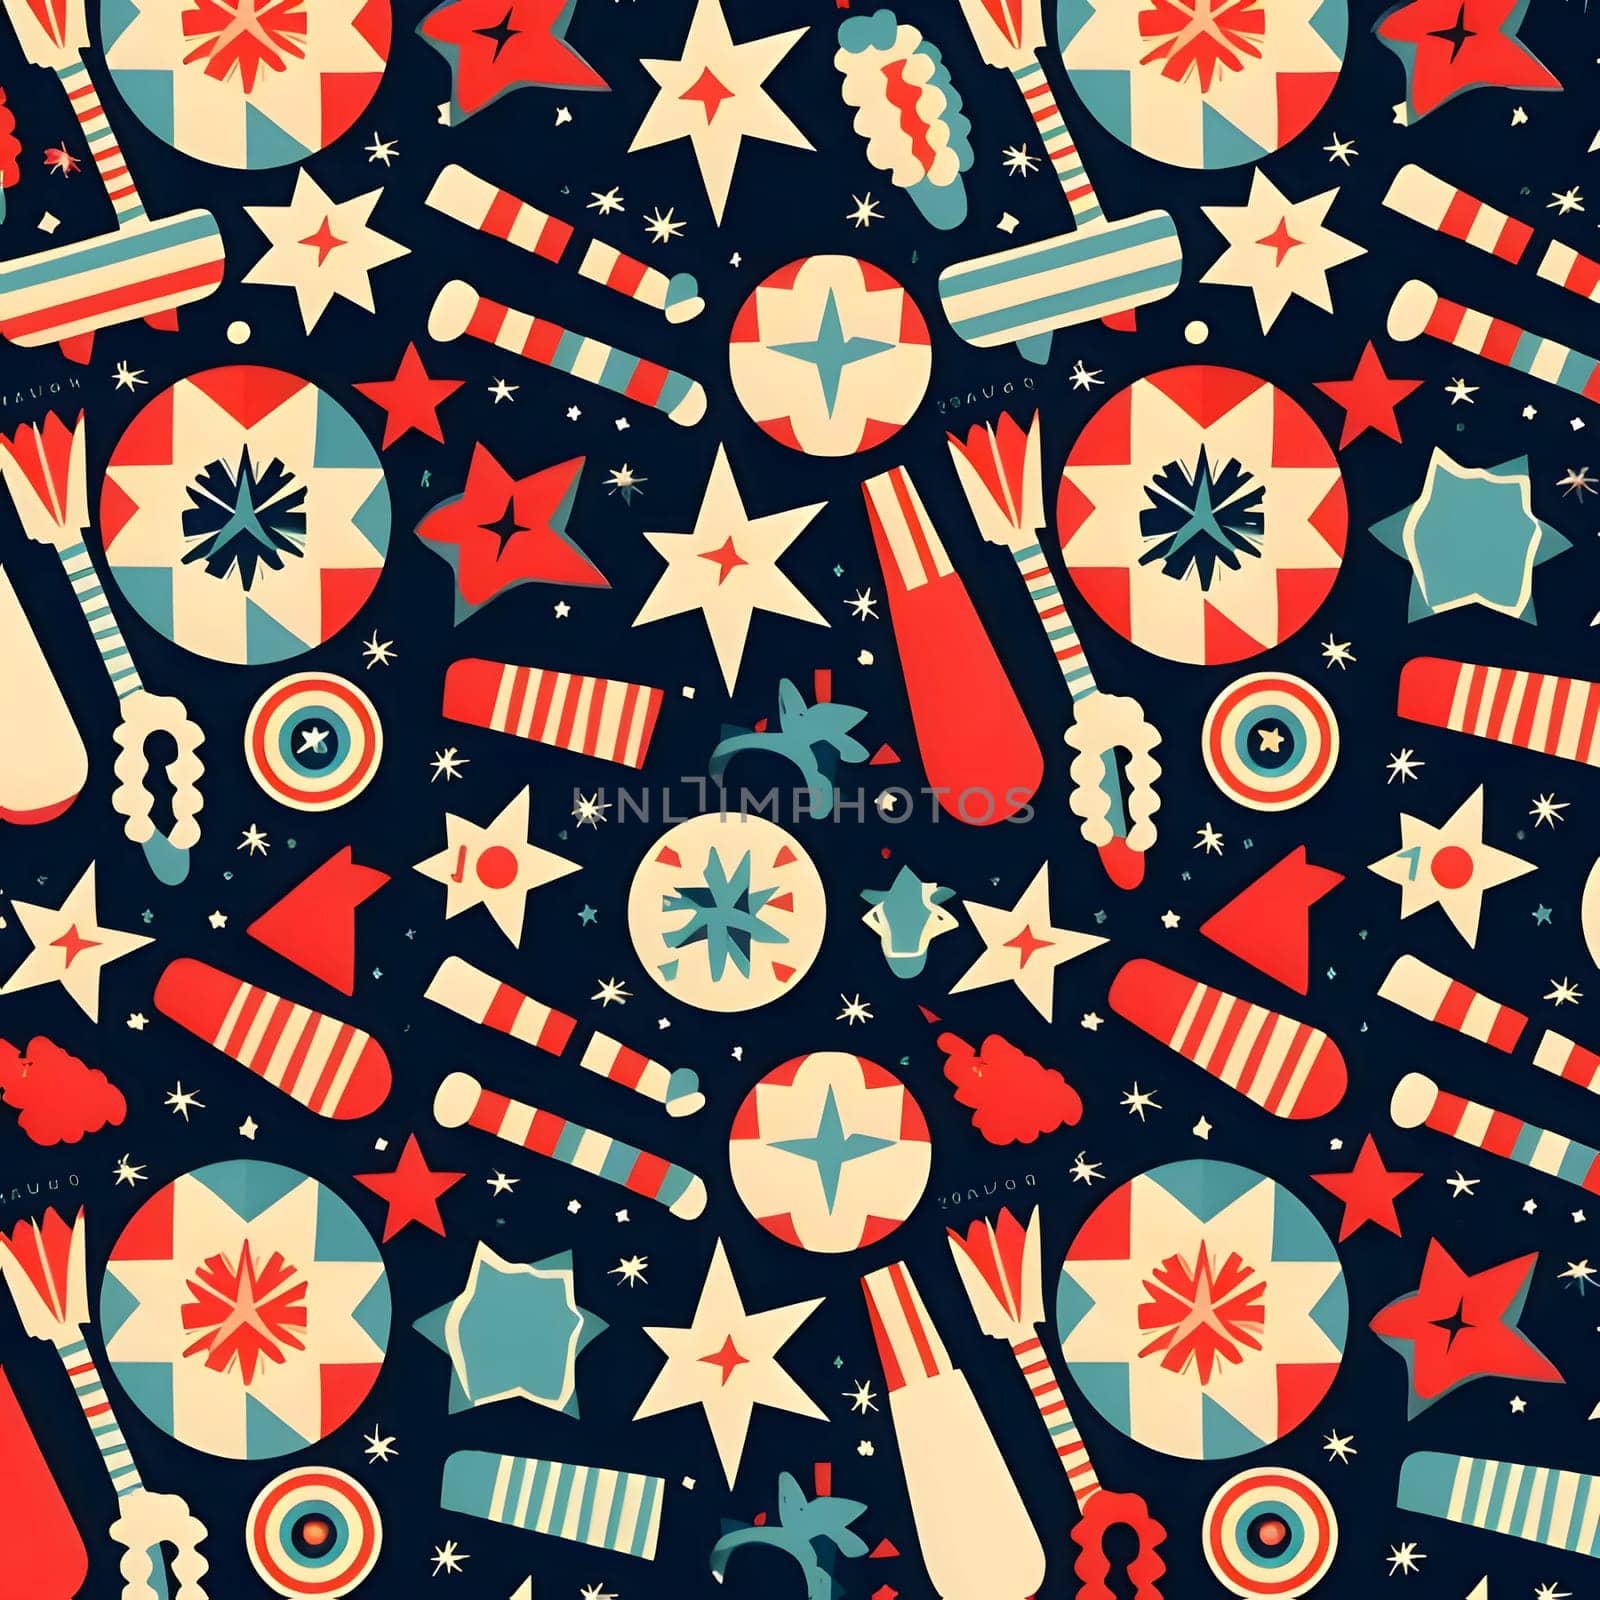 Patterns and banners backgrounds: Seamless pattern with fireworks and stars on dark blue background.